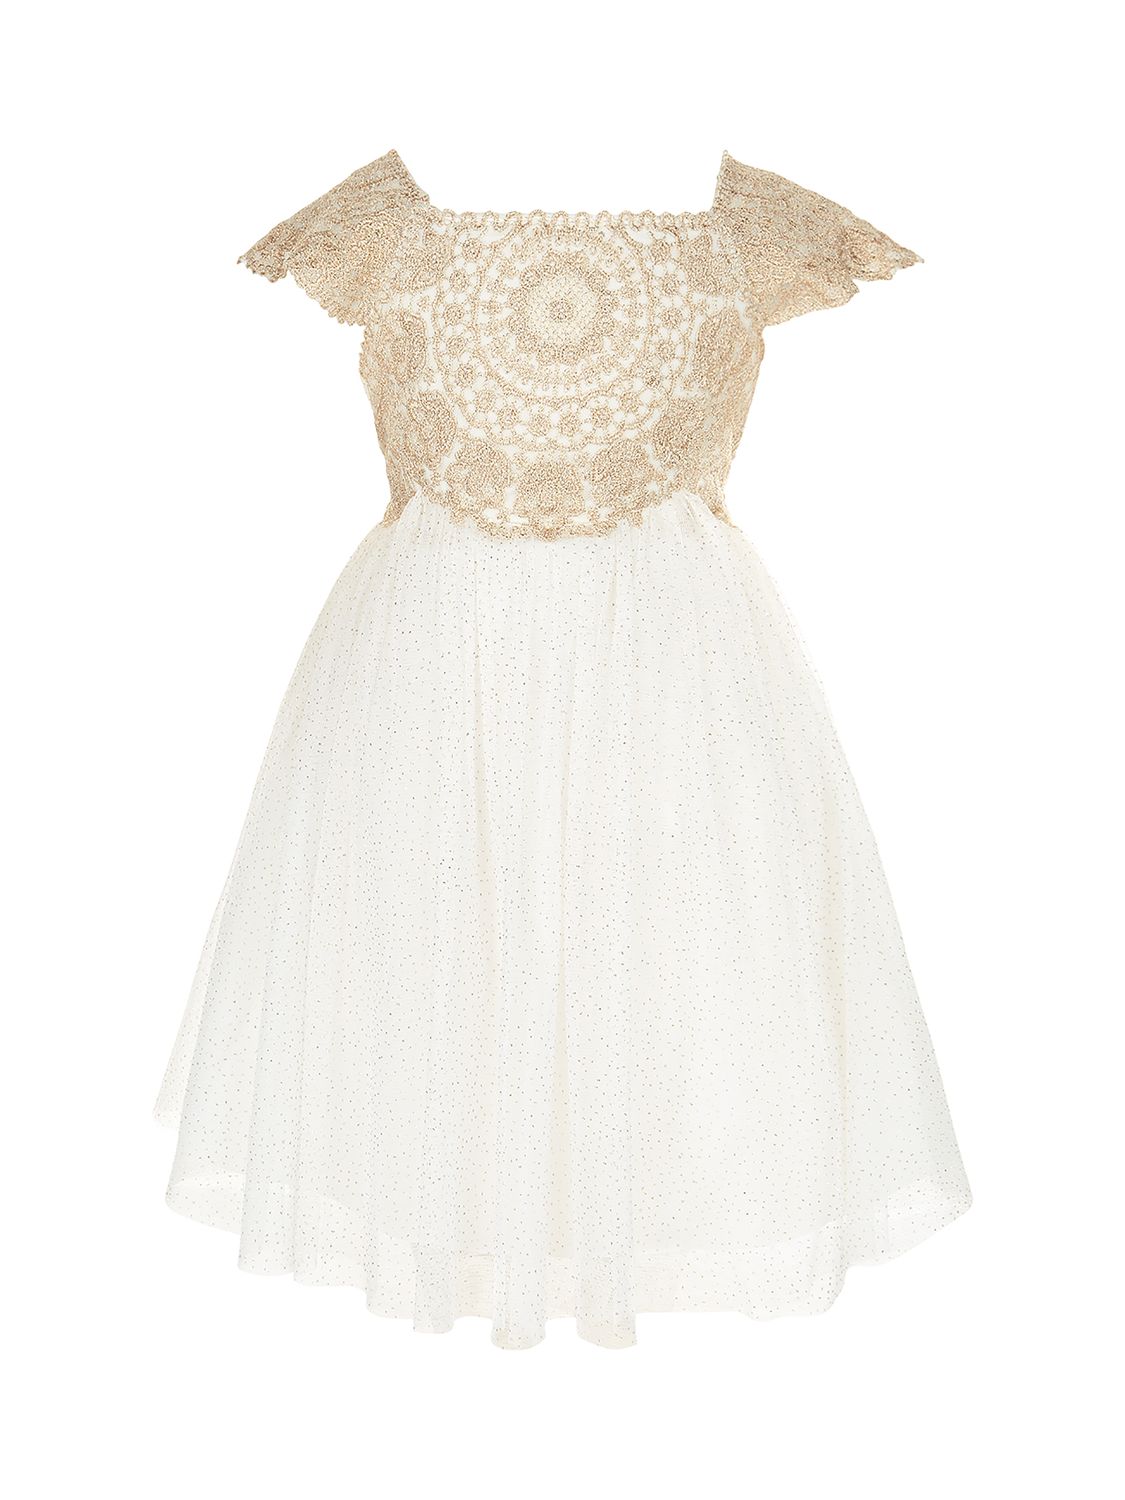 Buy Monsoon Baby Estella Embroidered Bodice Party Dress, Gold Online at johnlewis.com